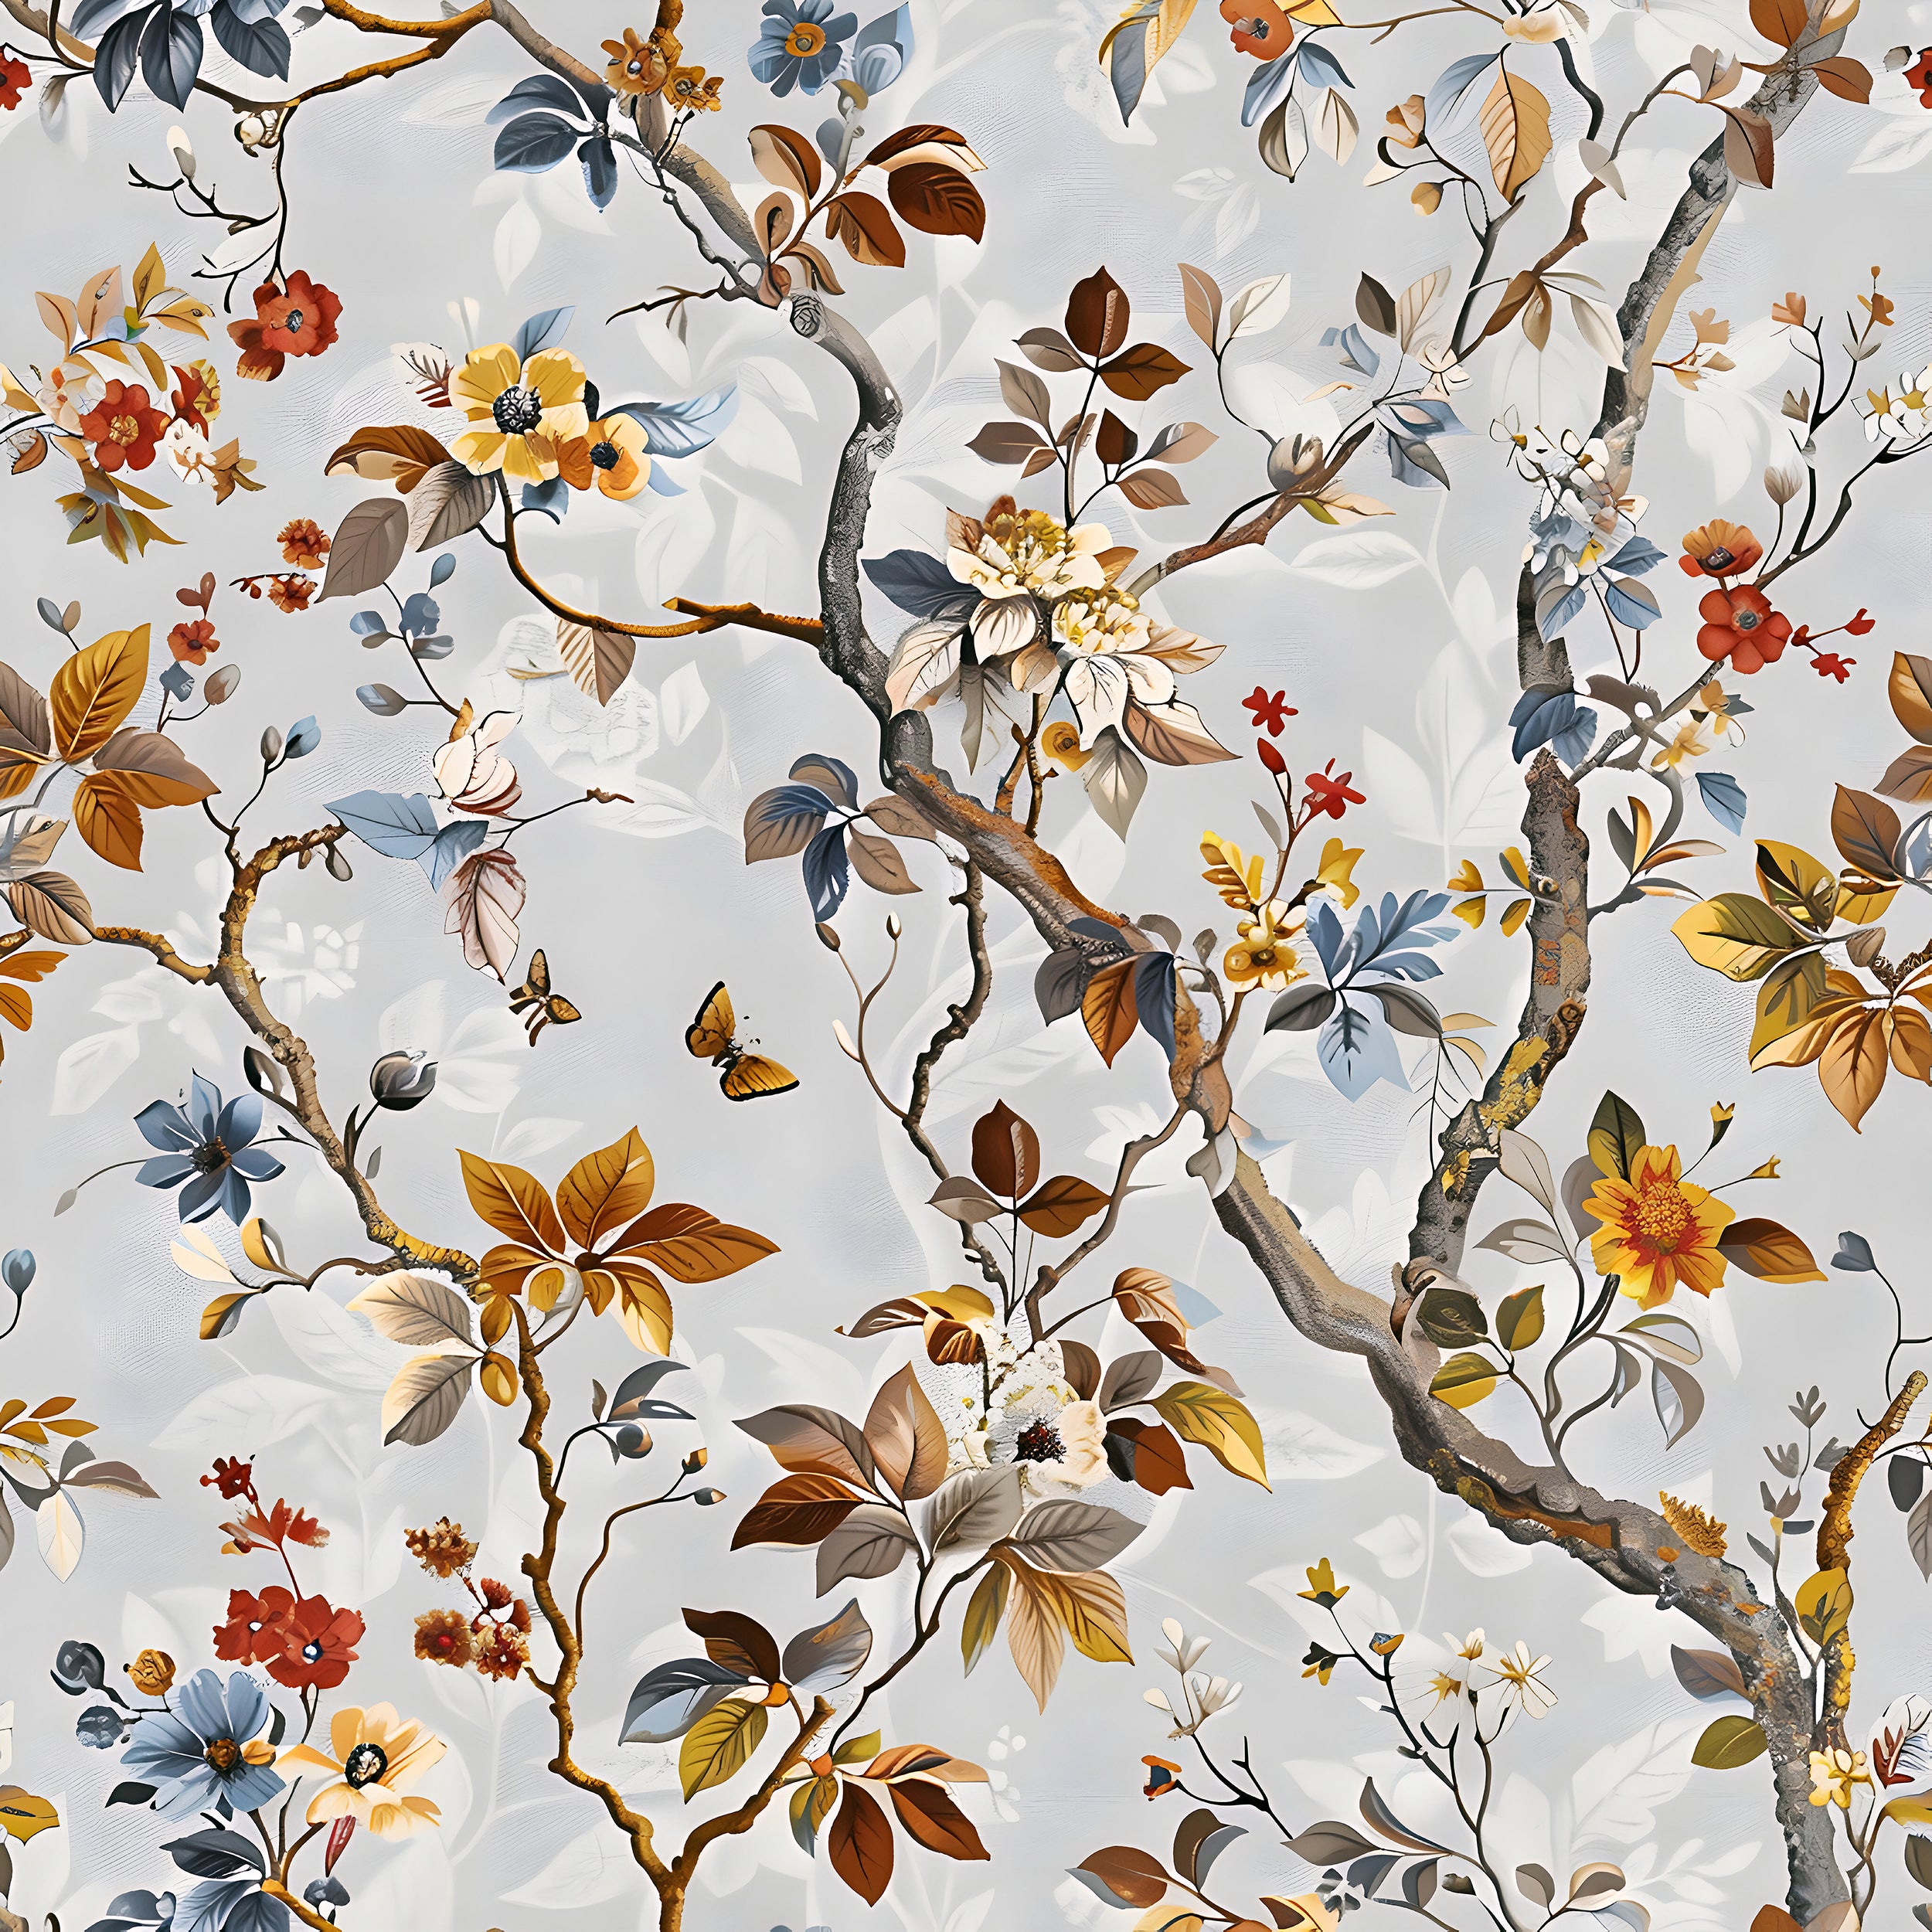 Tree leaves and flowers wall decor Removable blossom branches wallpaper